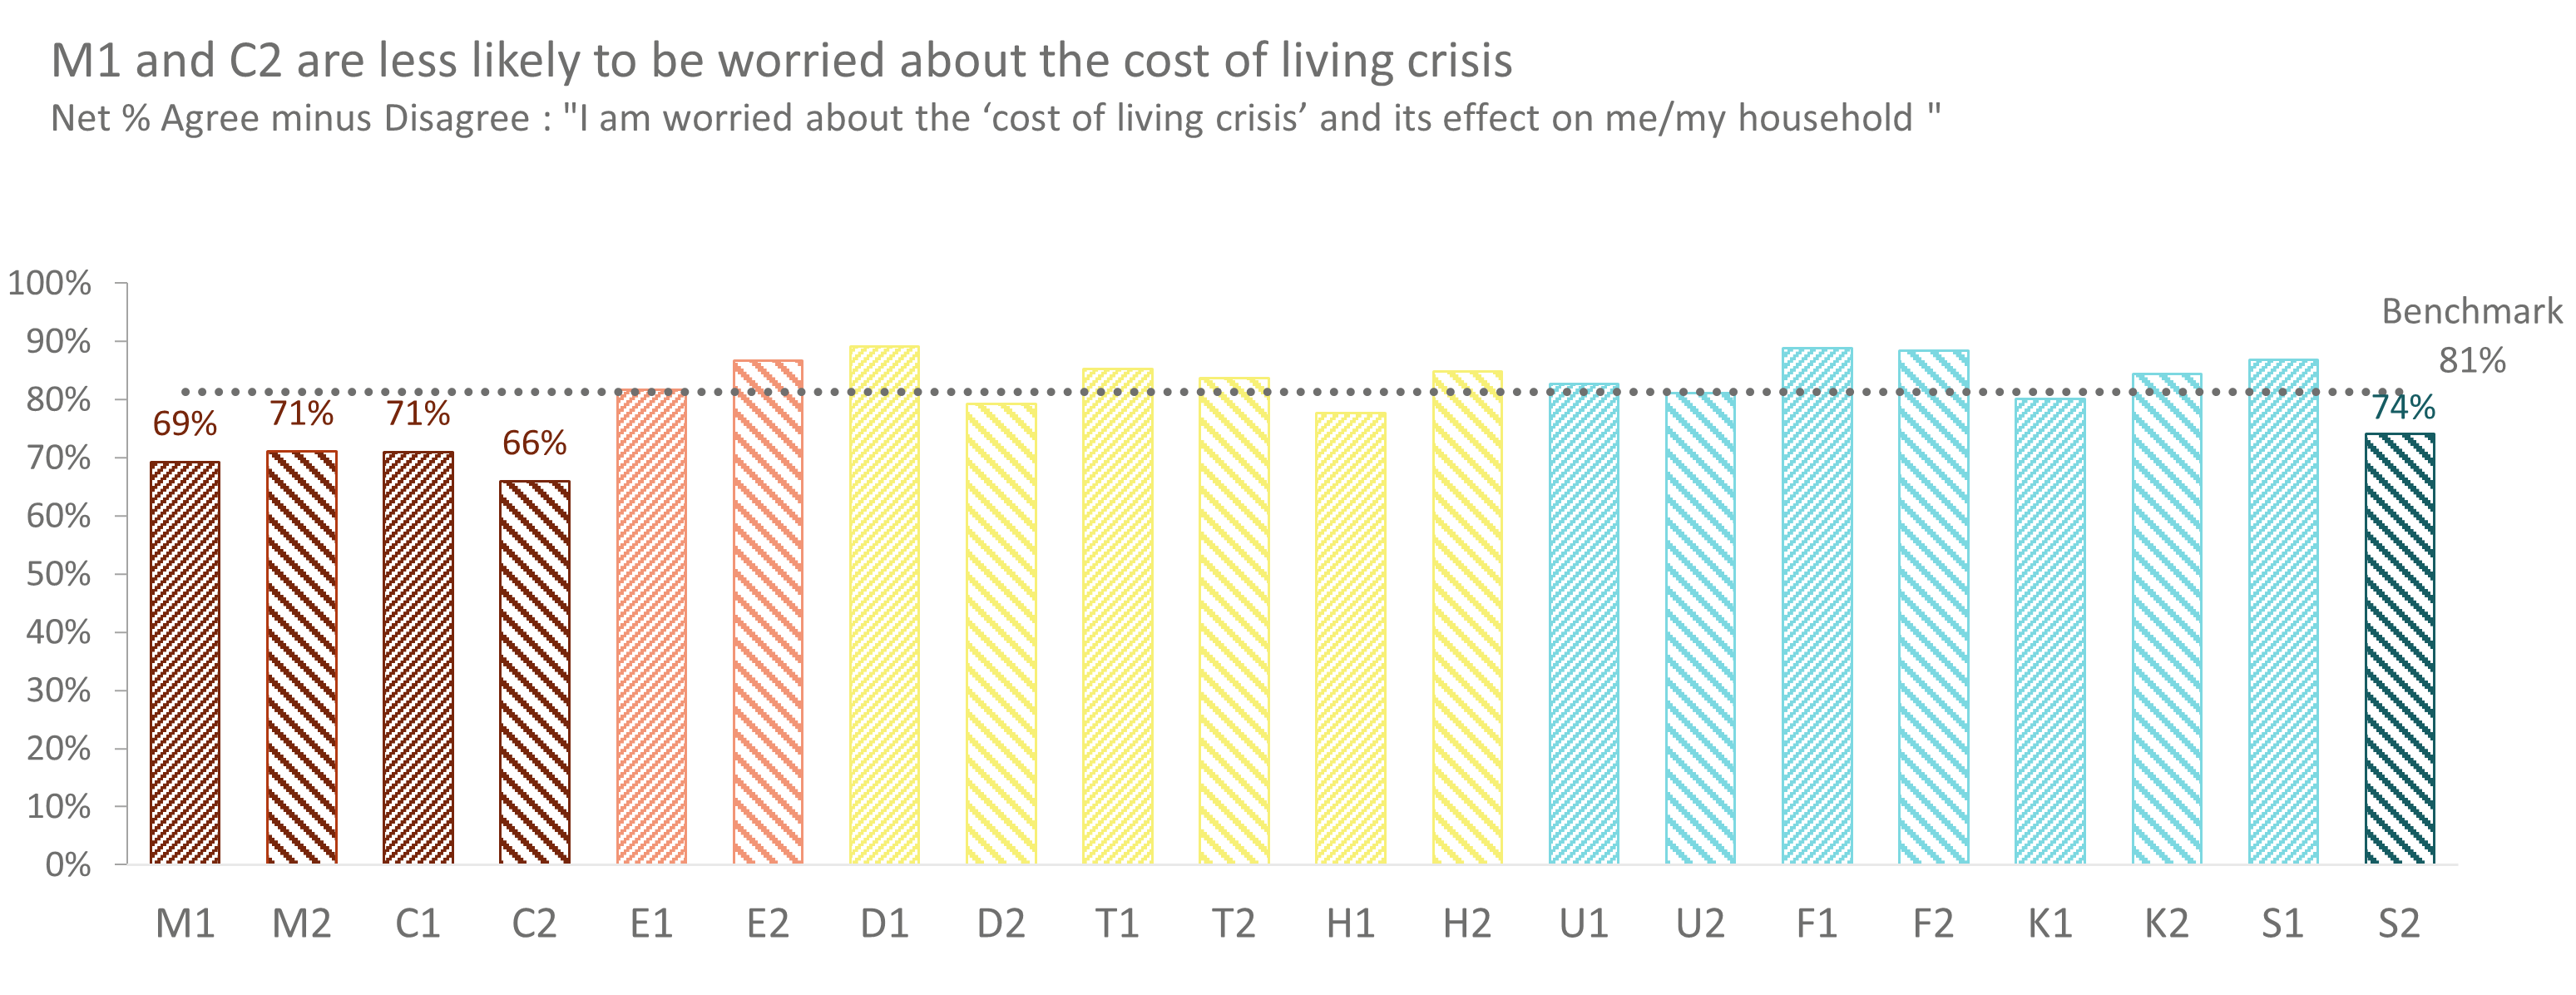 Cost of living worry by subsegment.png